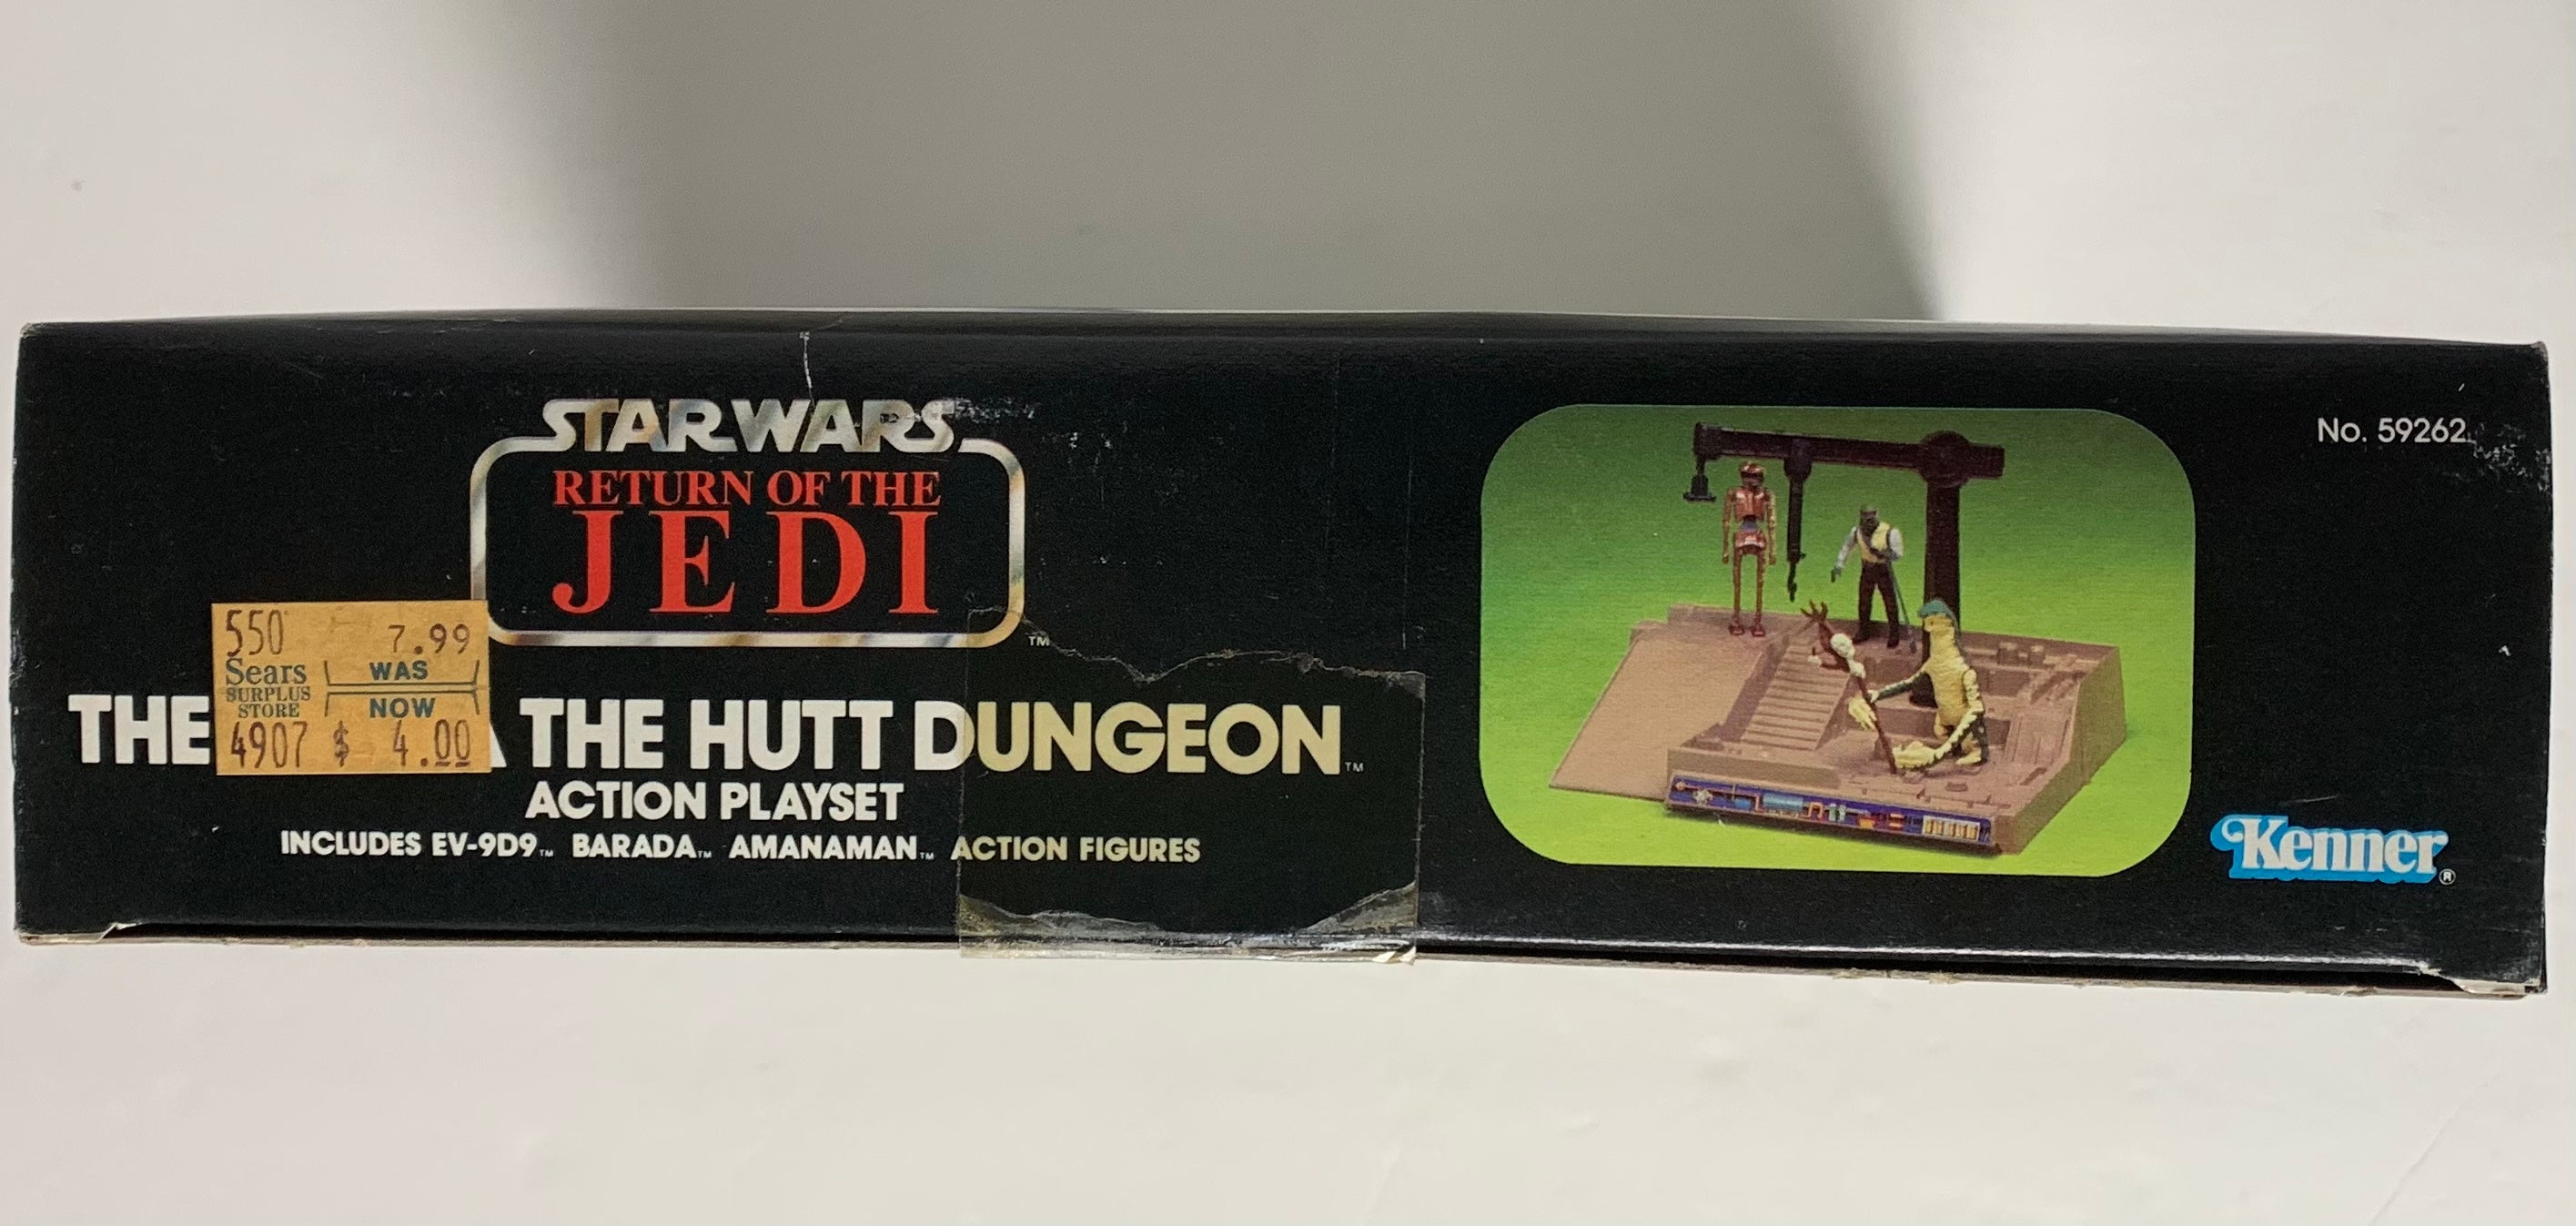 The Jabba The Hutt Dungeon, Star Wars, Return of the Jedi, unopened, 1984, Kenner